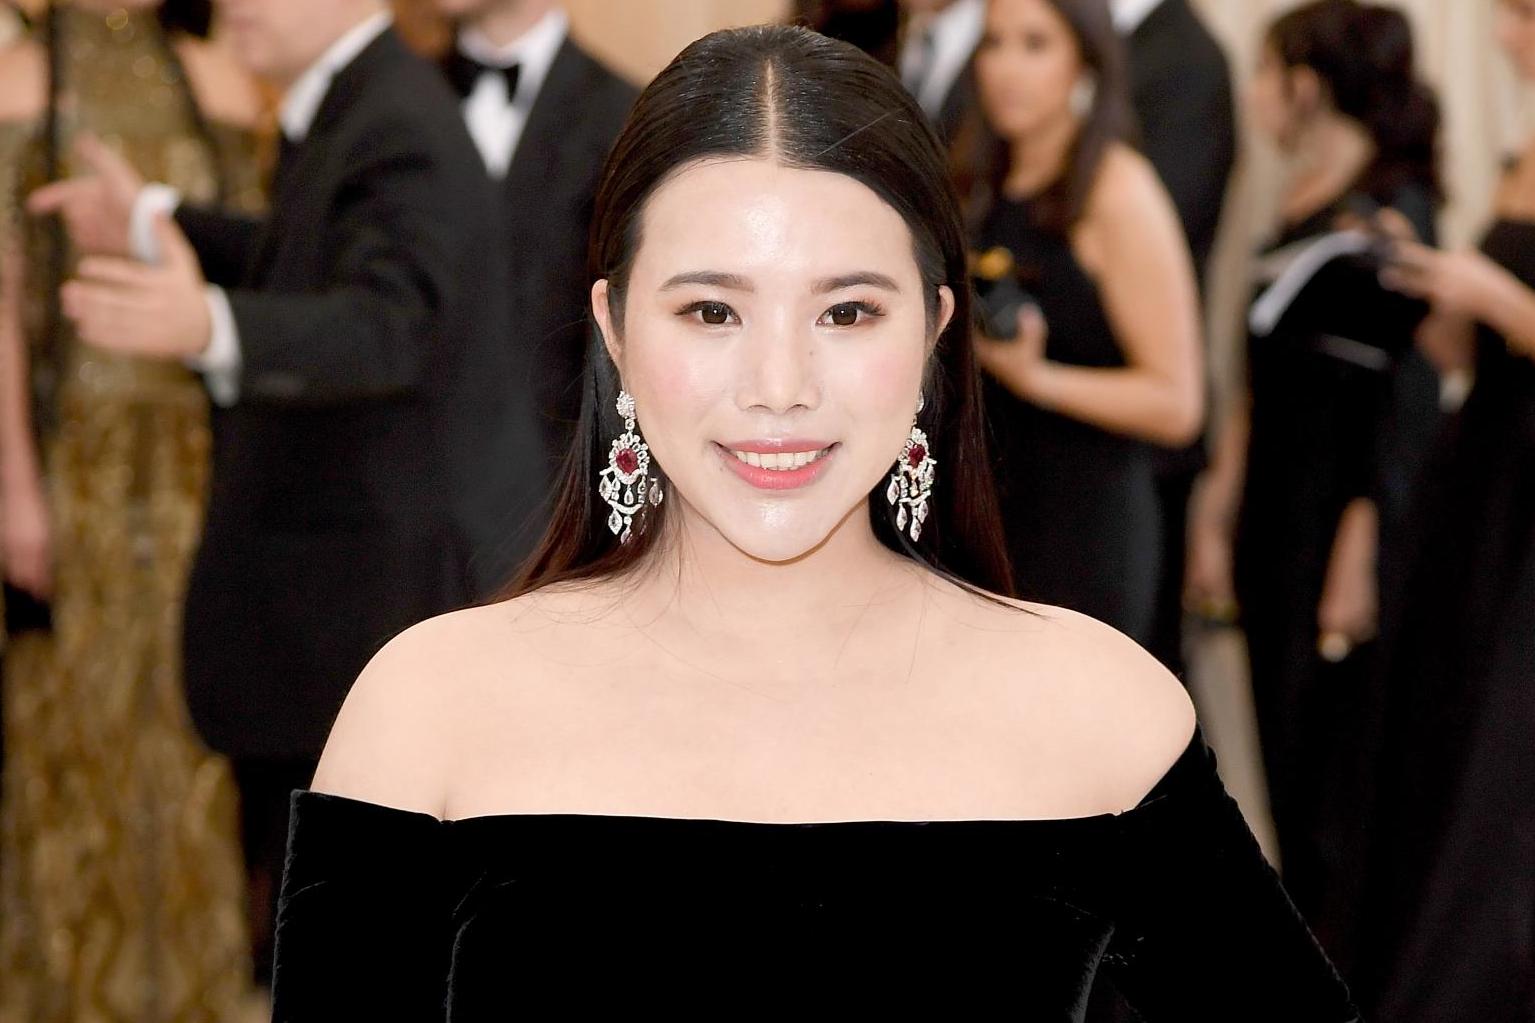 Wendy Yu, Investor and Philanthropist, attends Heavenly Bodies: Fashion & The Catholic Imagination Costume Institute Gala at the Metropolitan Museum of Art on May 7, 2018